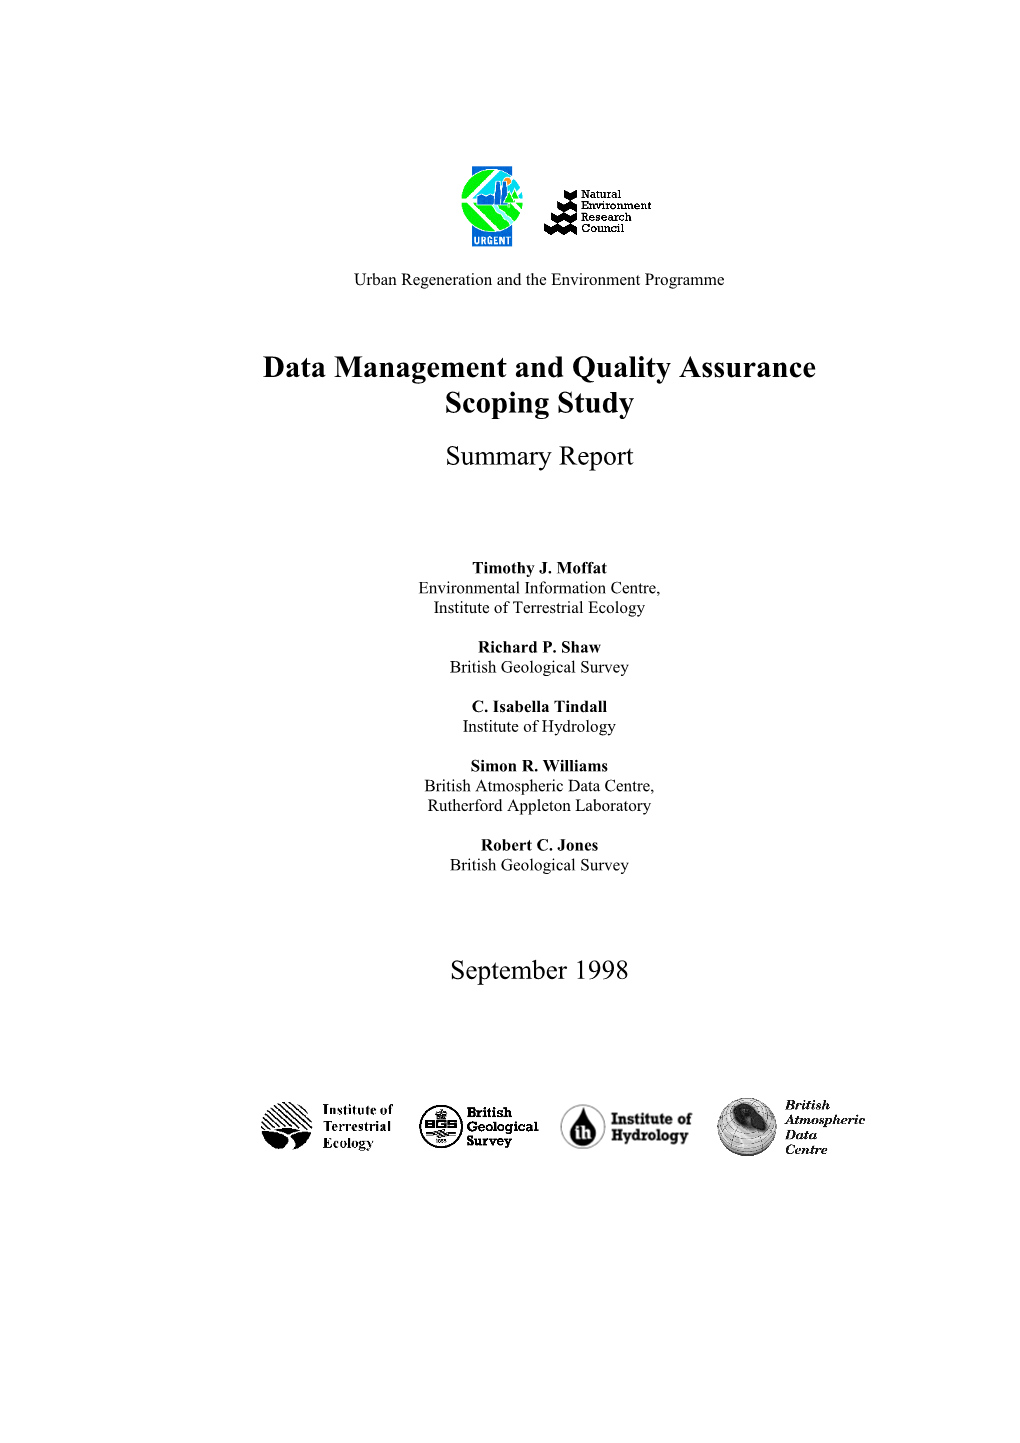 URGENT Data Management and Quality Assurance Scoping Study